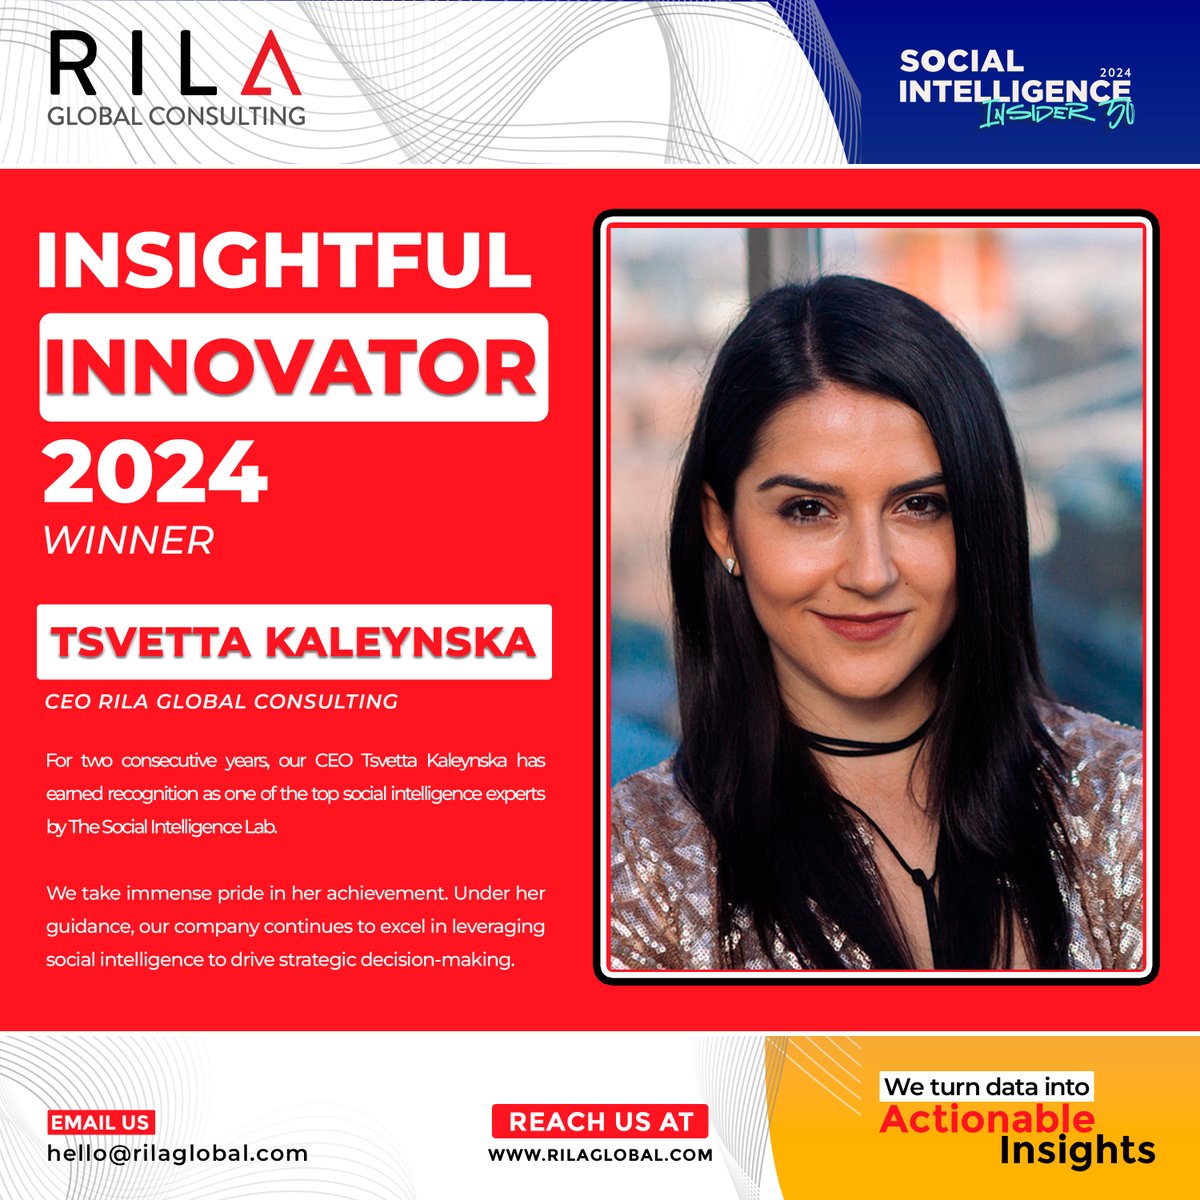 For 2 consecutive years our CEO Tsvetta Kaleynska has earned recognition as a top social intelligence expert by The Social Intelligence Lab. Her leadership continues to drive us forward, constantly innovating and exceeding expectations. ✊ 

#sociallistening #rilaglobalconsulting